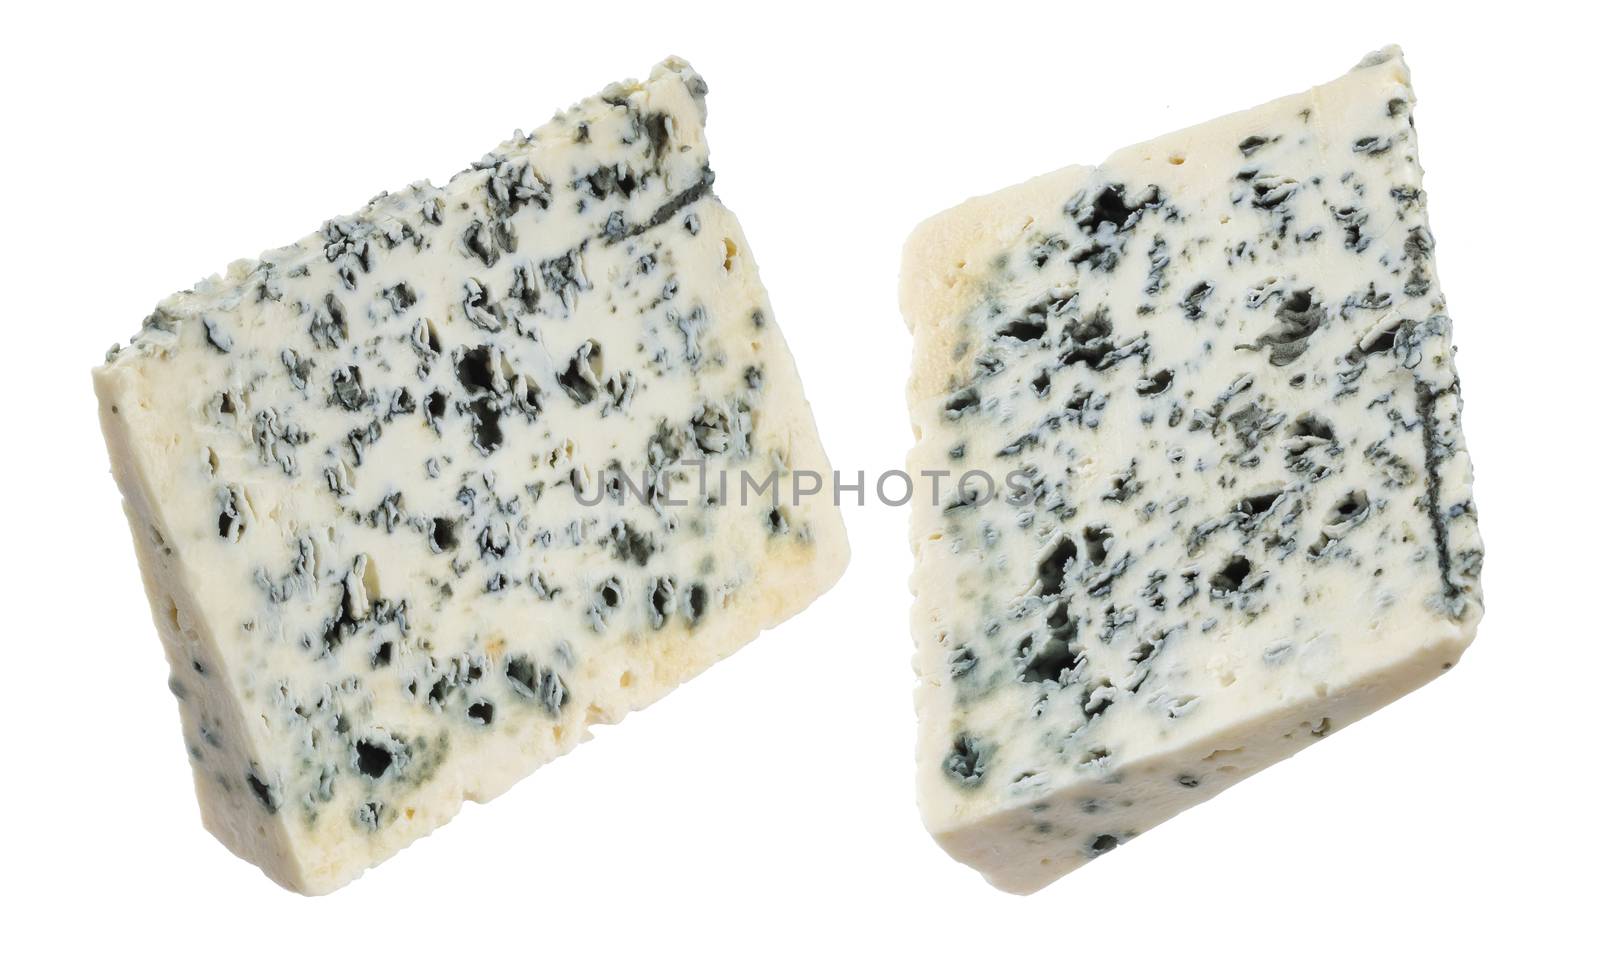 Danish blue cheese triangle isolated on white background with clipping path by xamtiw